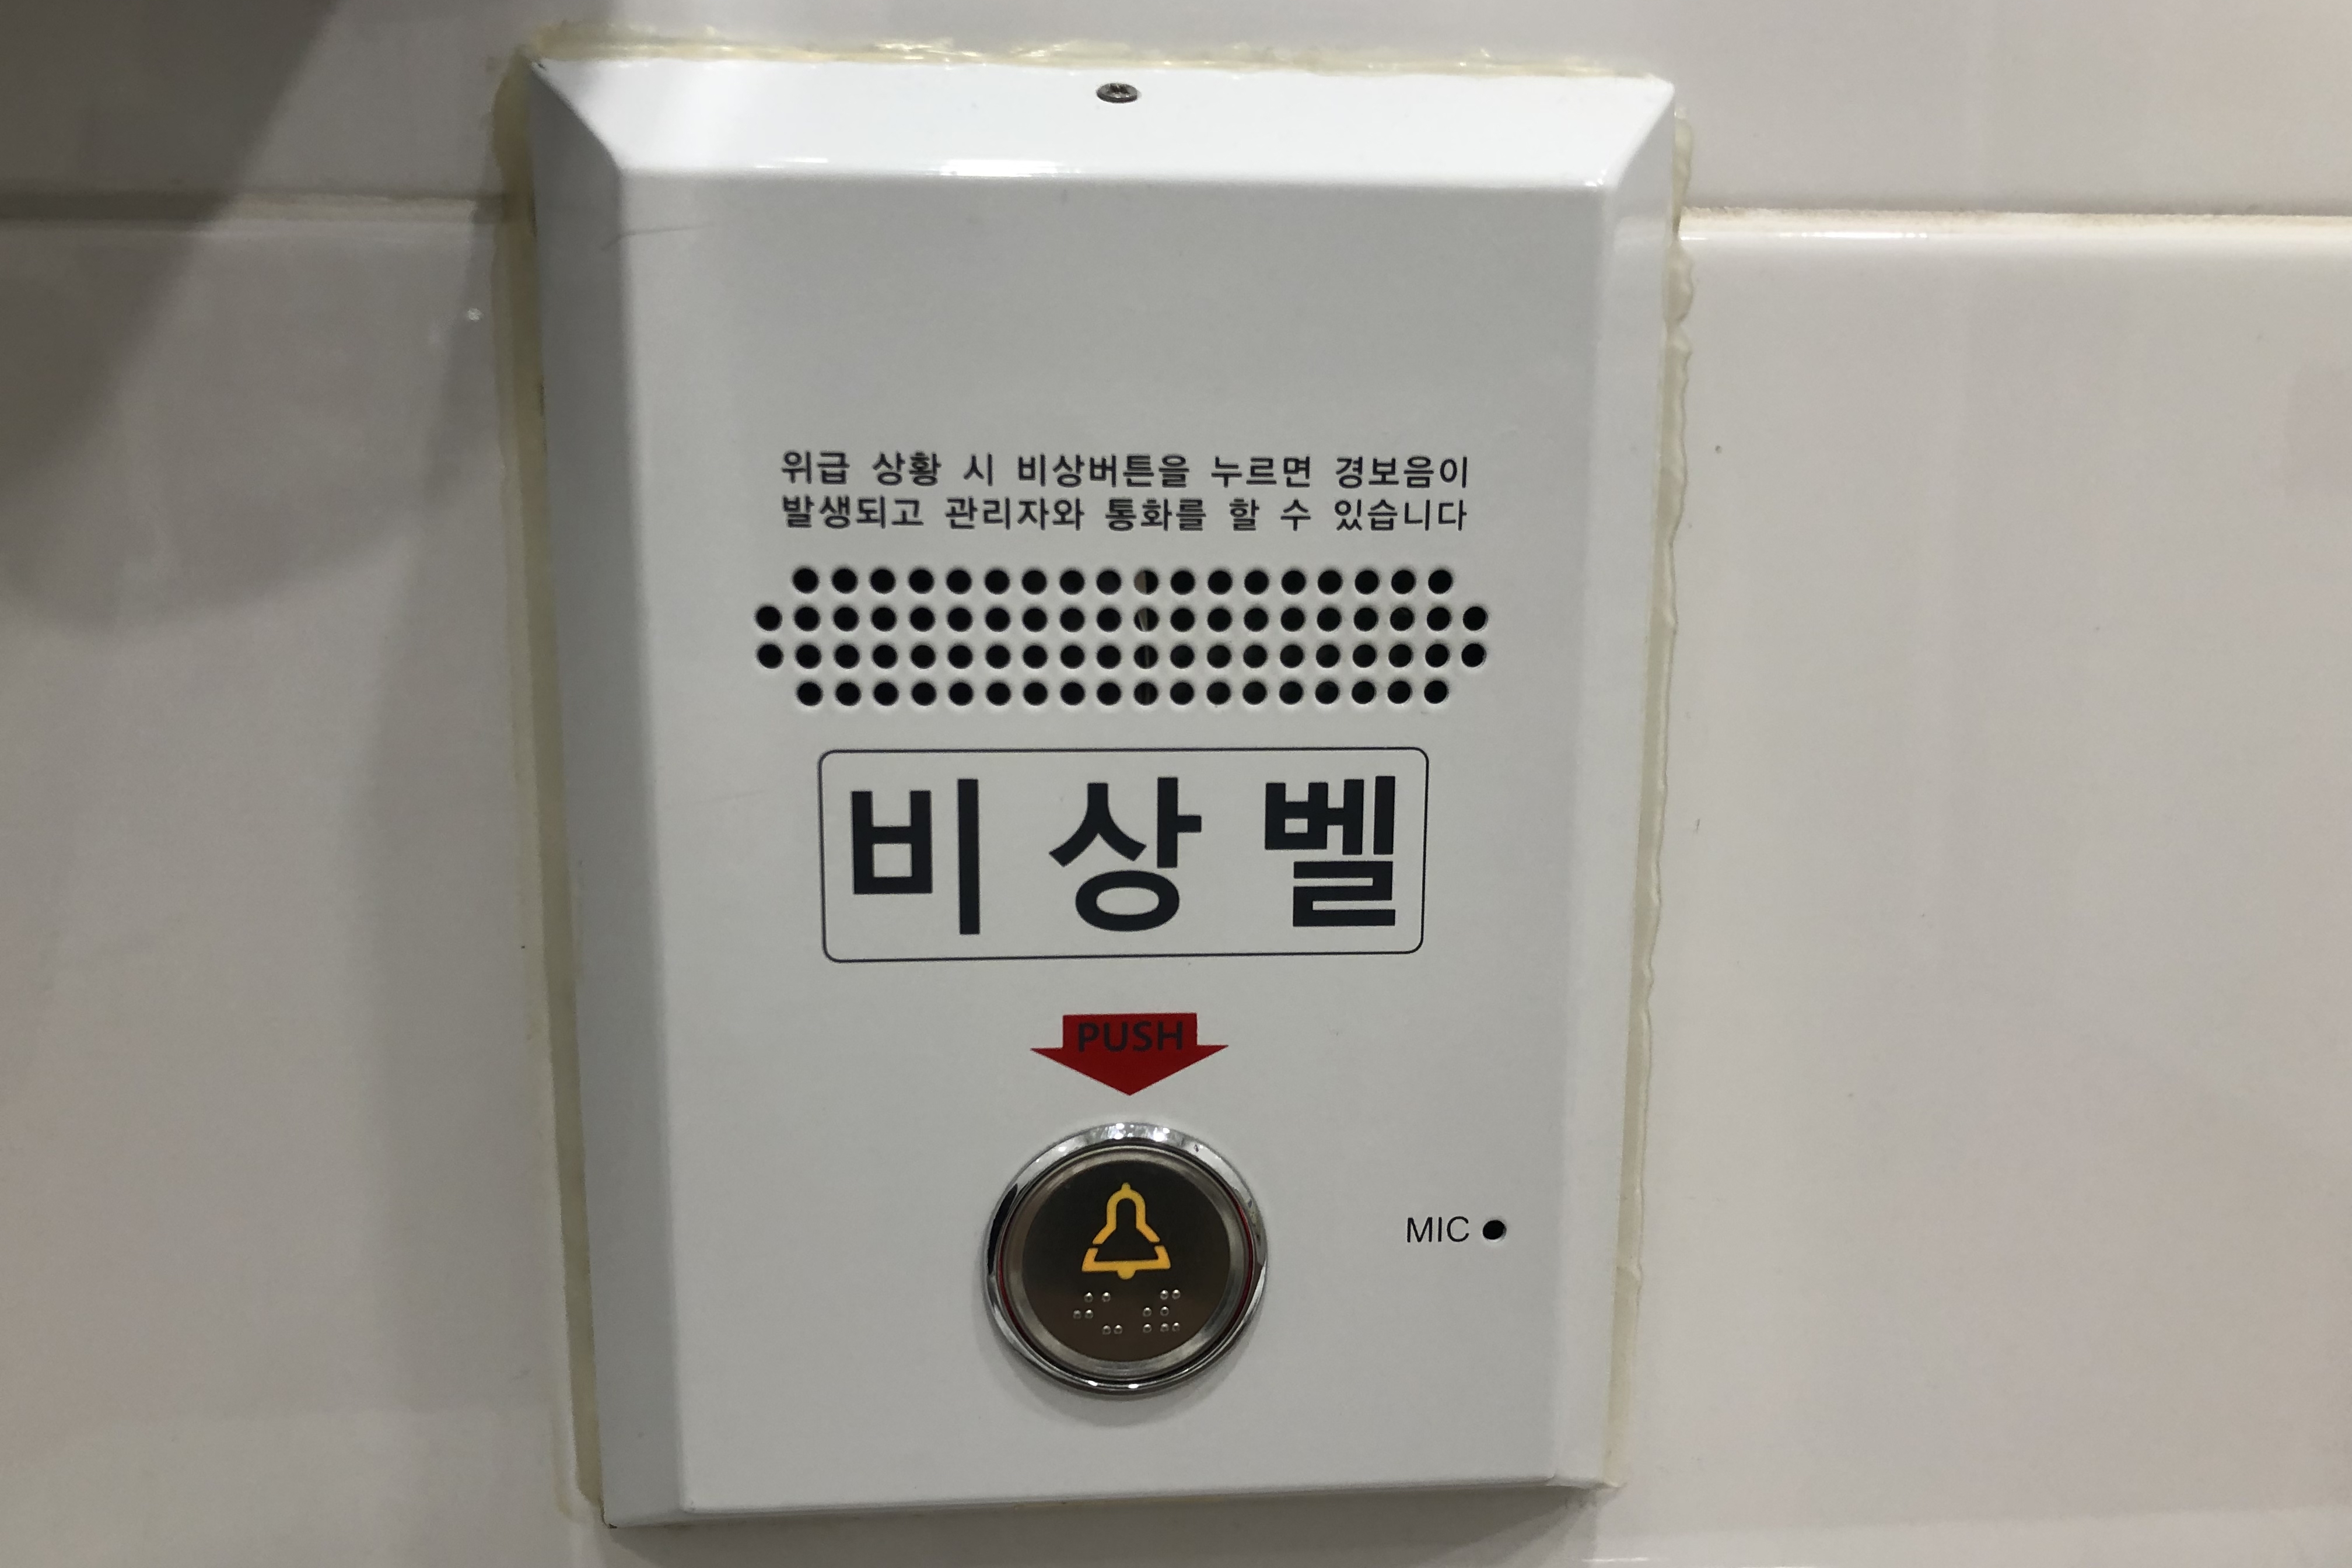 Restroom0 : Emergency call button in Seoul Botanic Park
